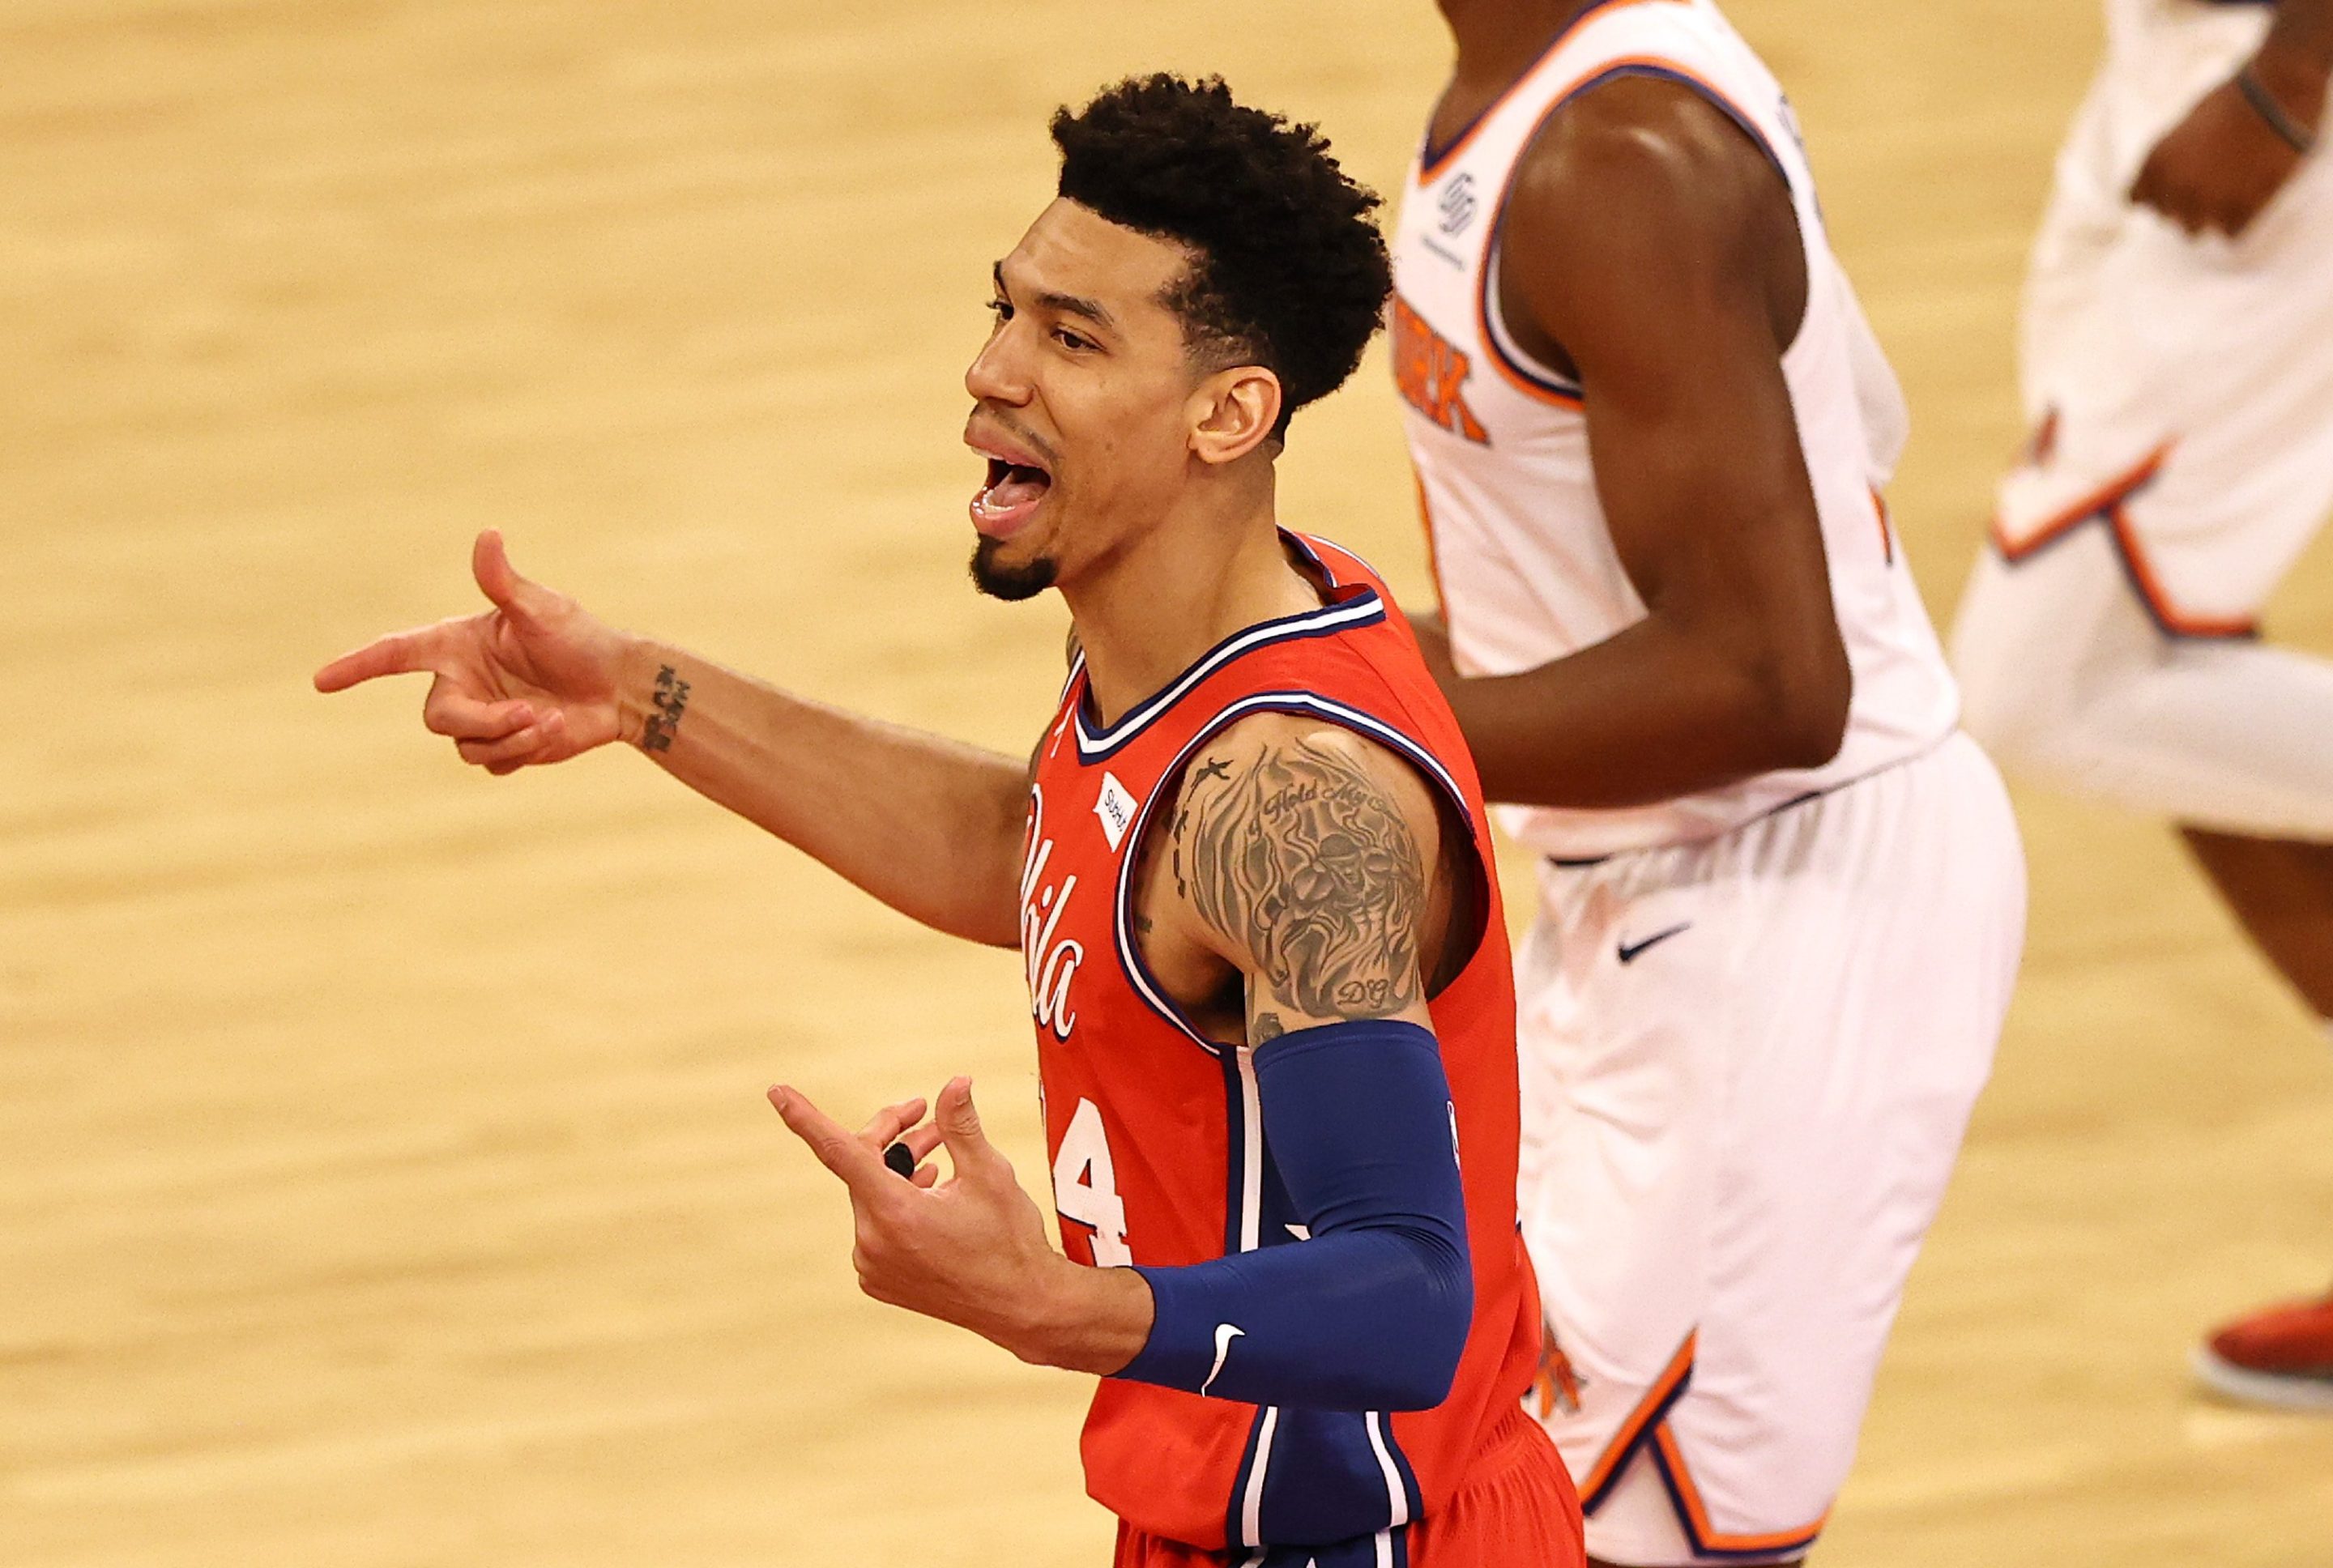 Danny Green celebrates a made three-pointer in a Sixers win over the Knicks.